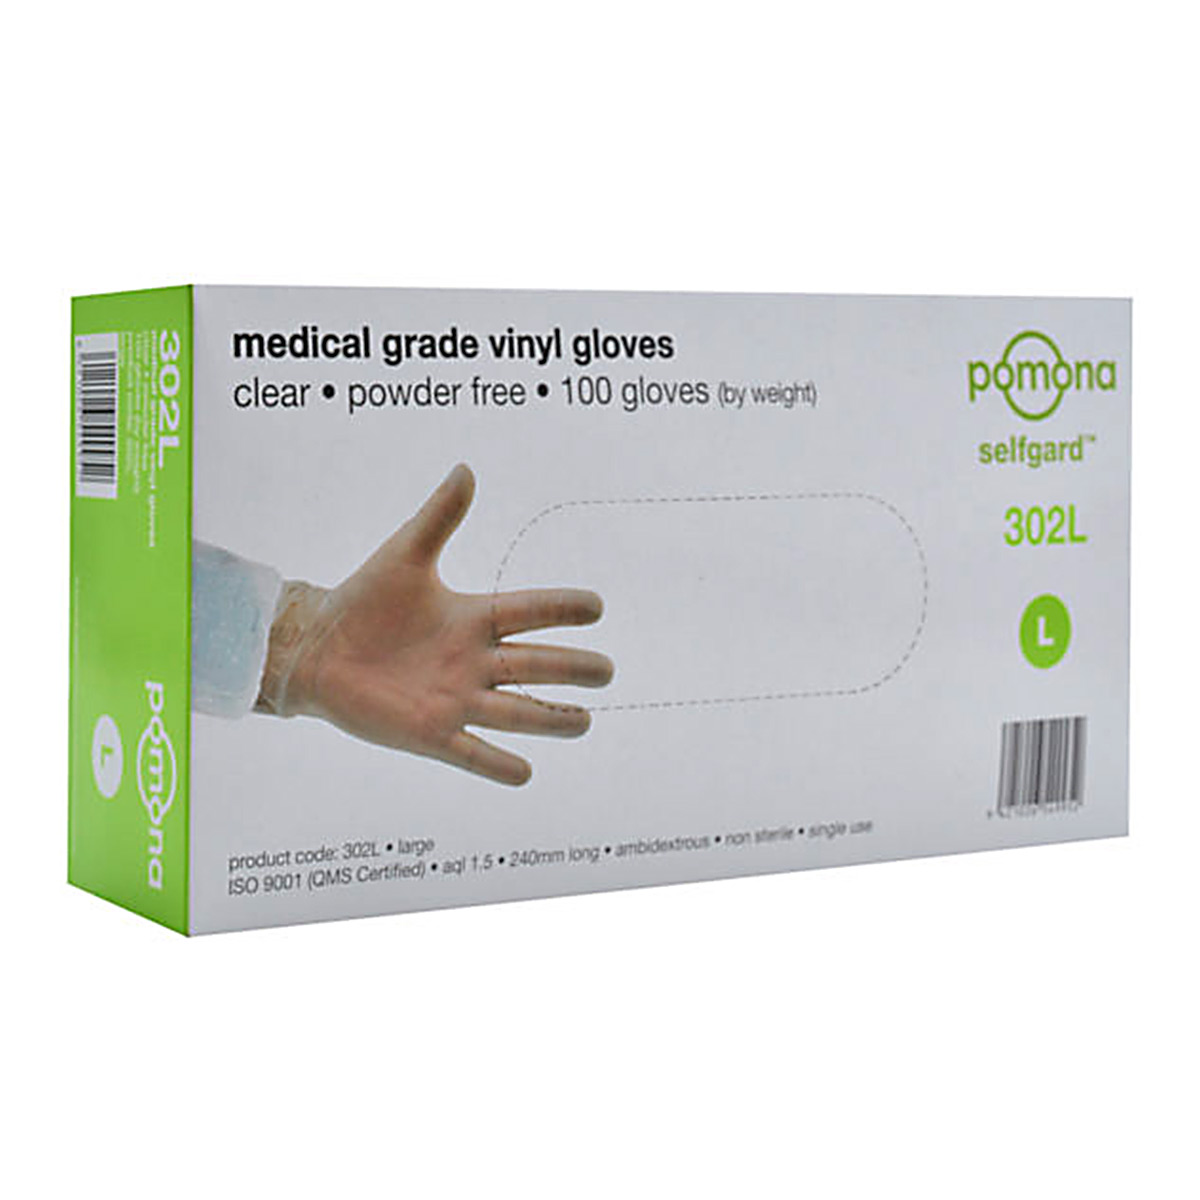 consumables-hospitality-gloves-pomona-vinyl-powderfree-glove-SMALL-100-pack-food-safe-clear-vinyl-economical-durable-comfortable-janitorial-food-production-food-service-industries-vjs-distributors-302S